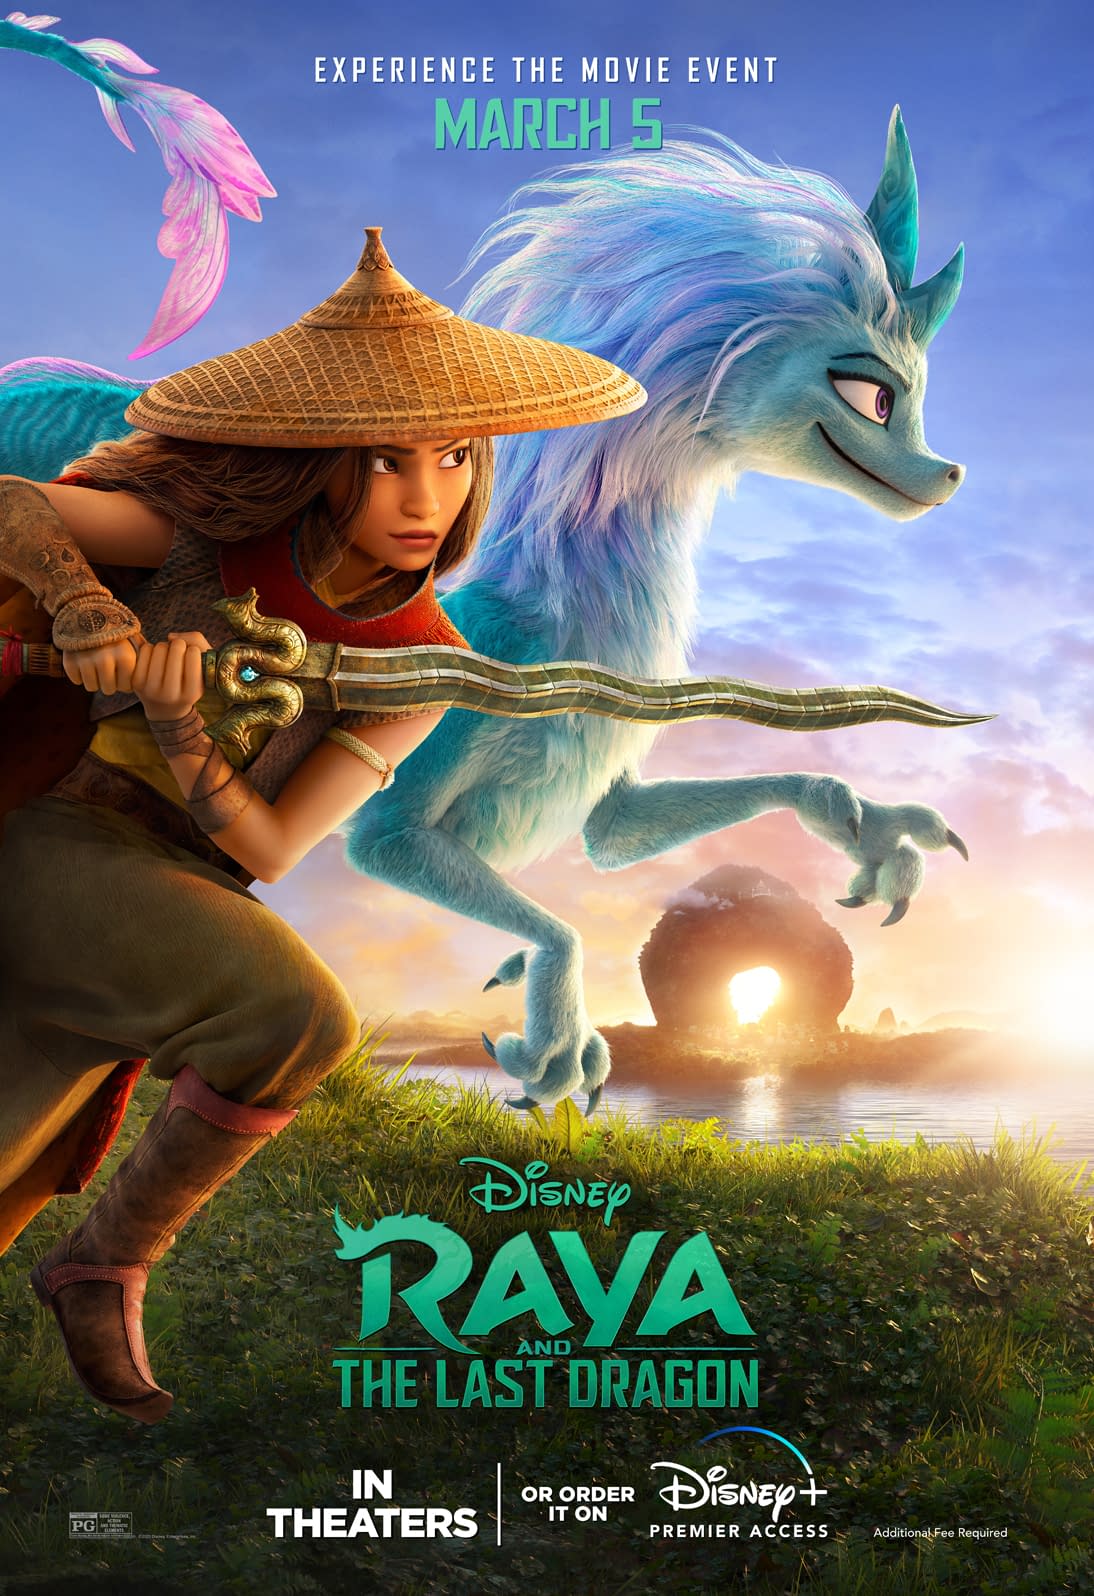 Film Review: Raya and the Last Dragon | Mission Viejo Library Teen Voice